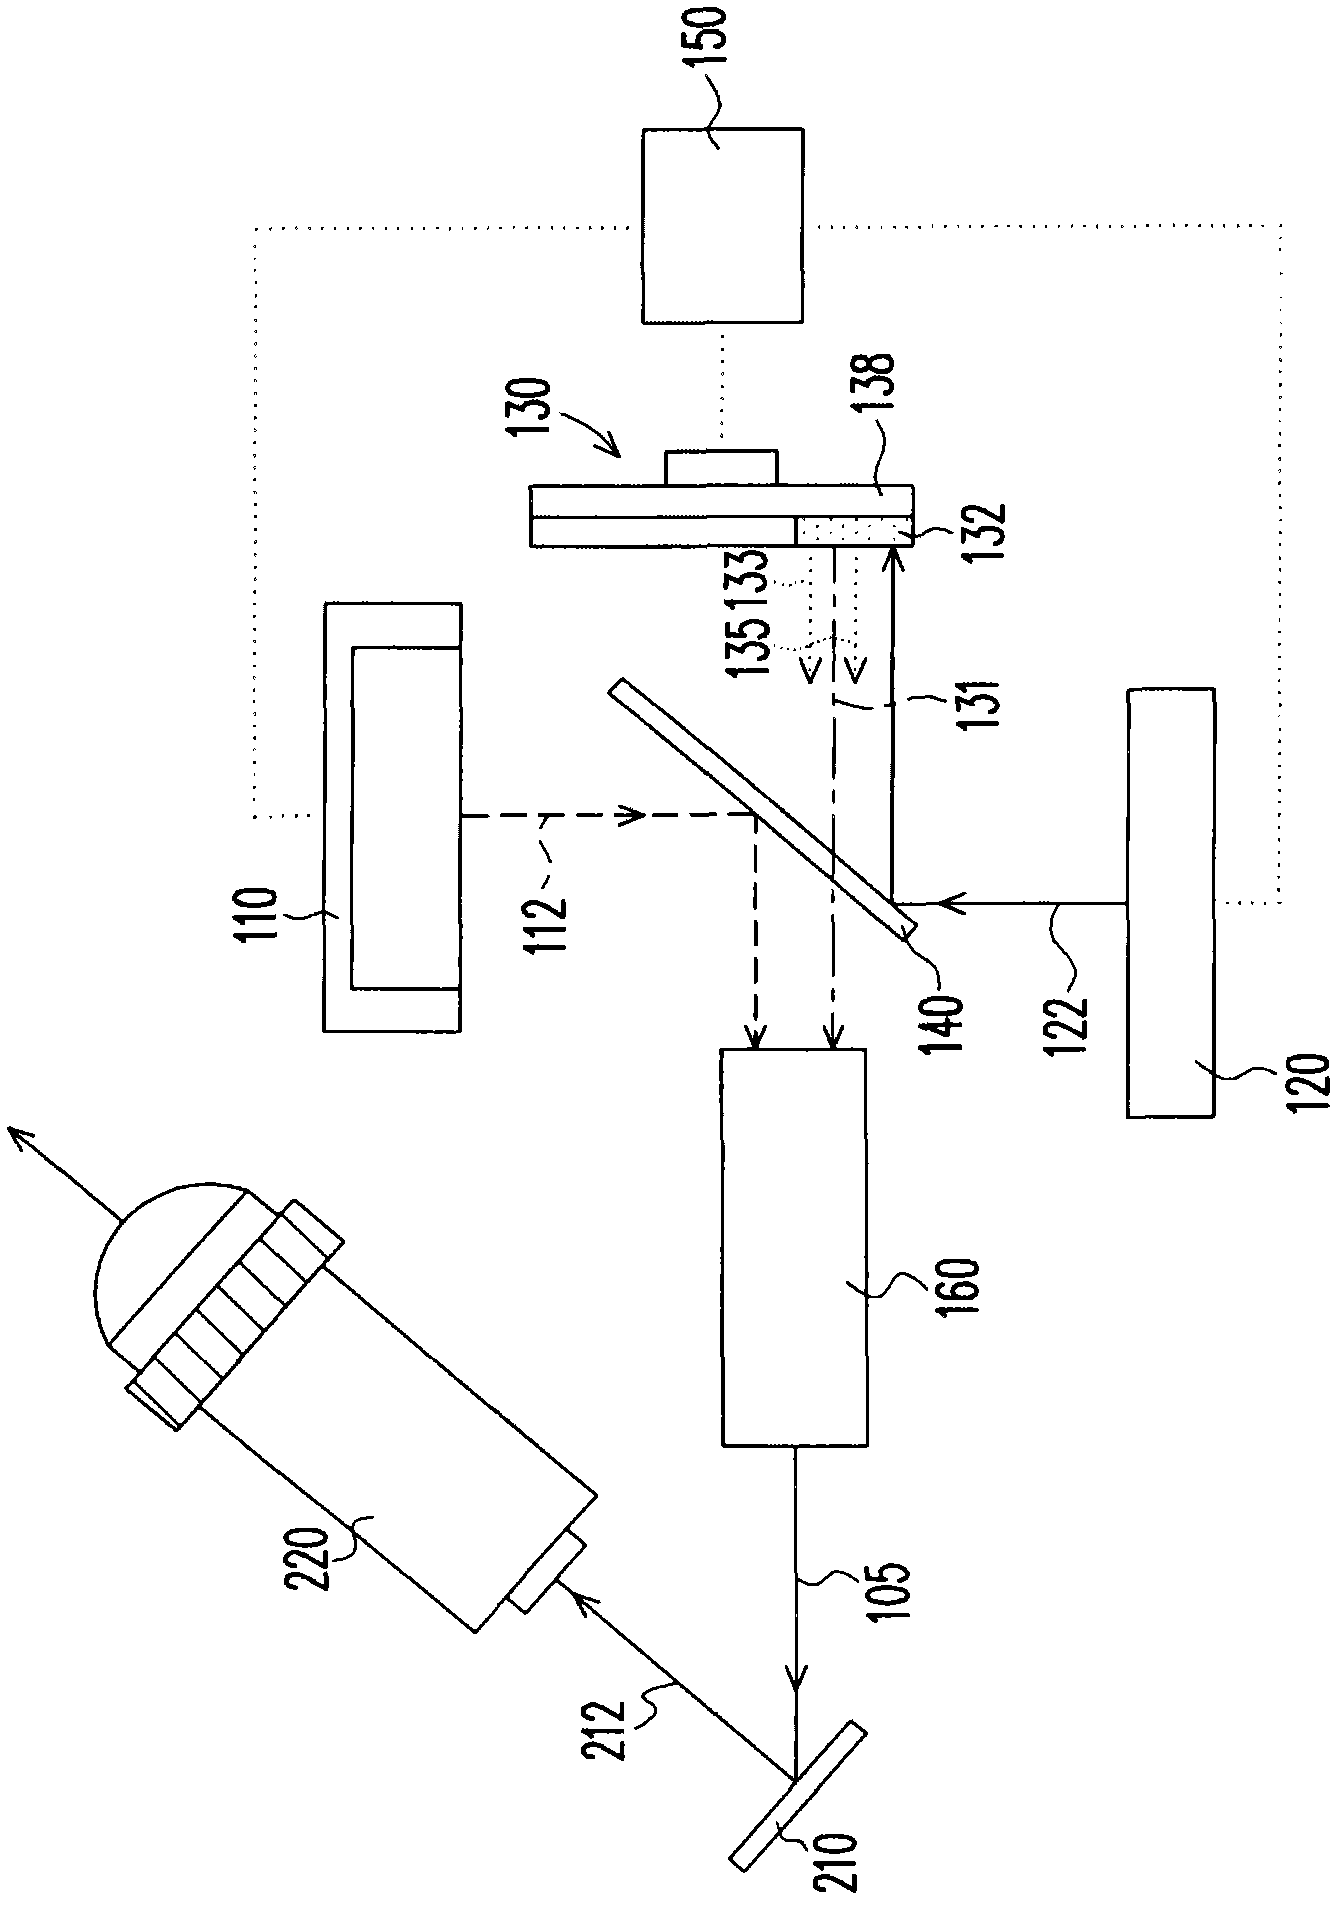 Illuminating system and projecting apparatus